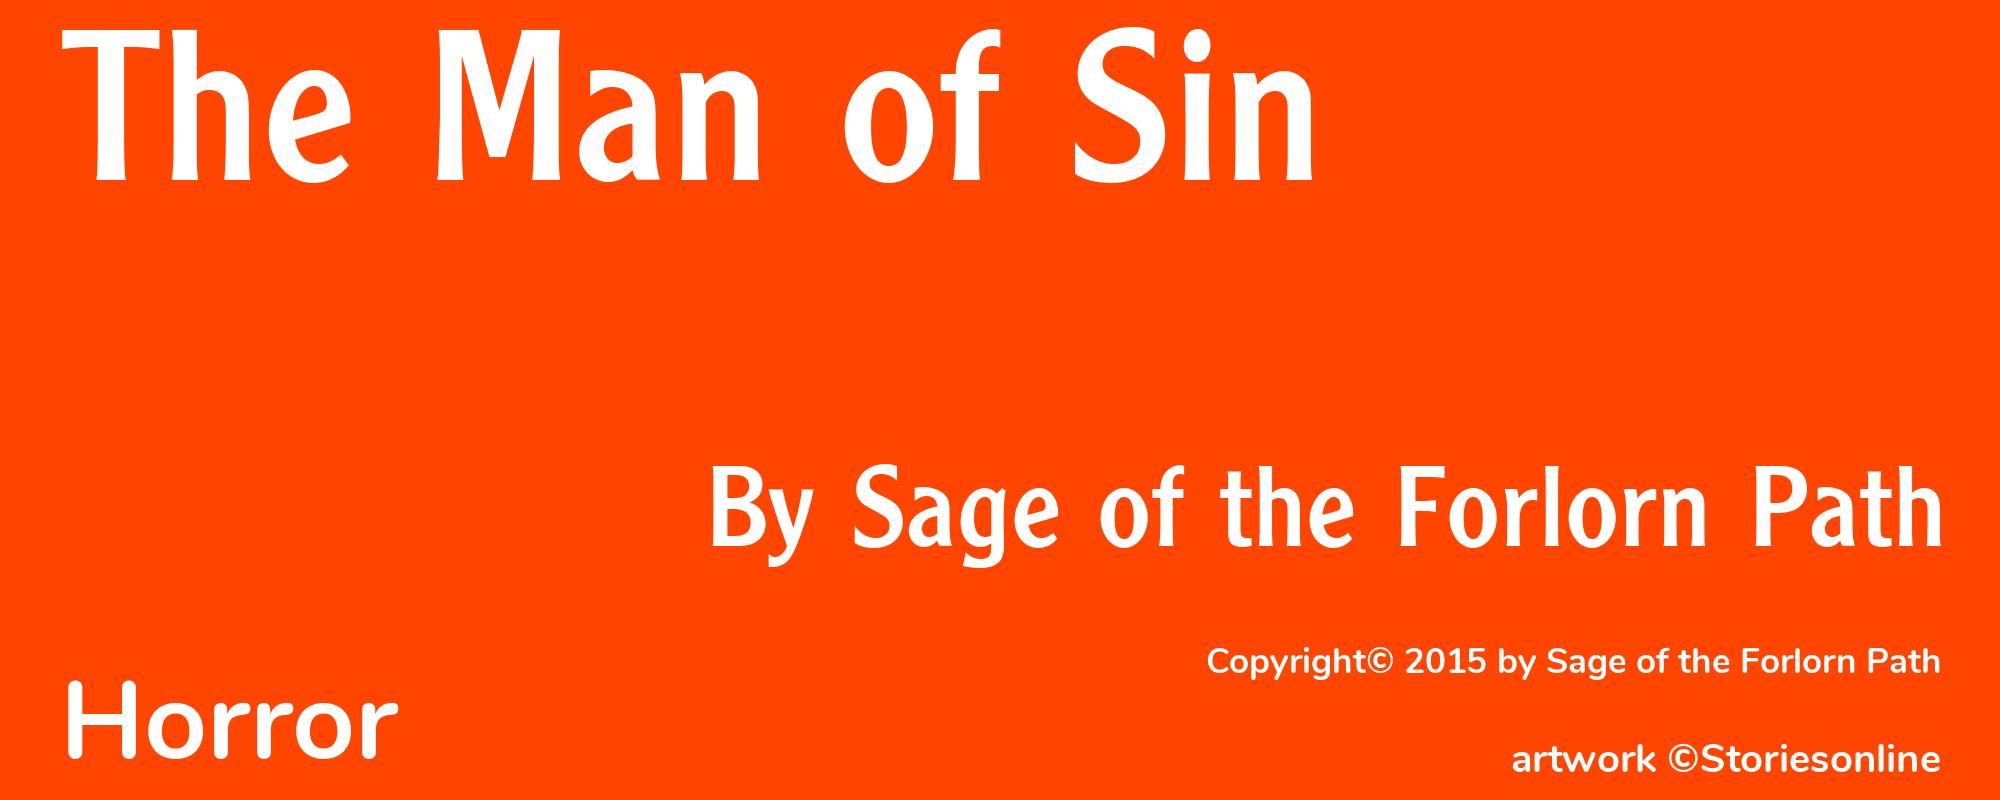 The Man of Sin - Cover